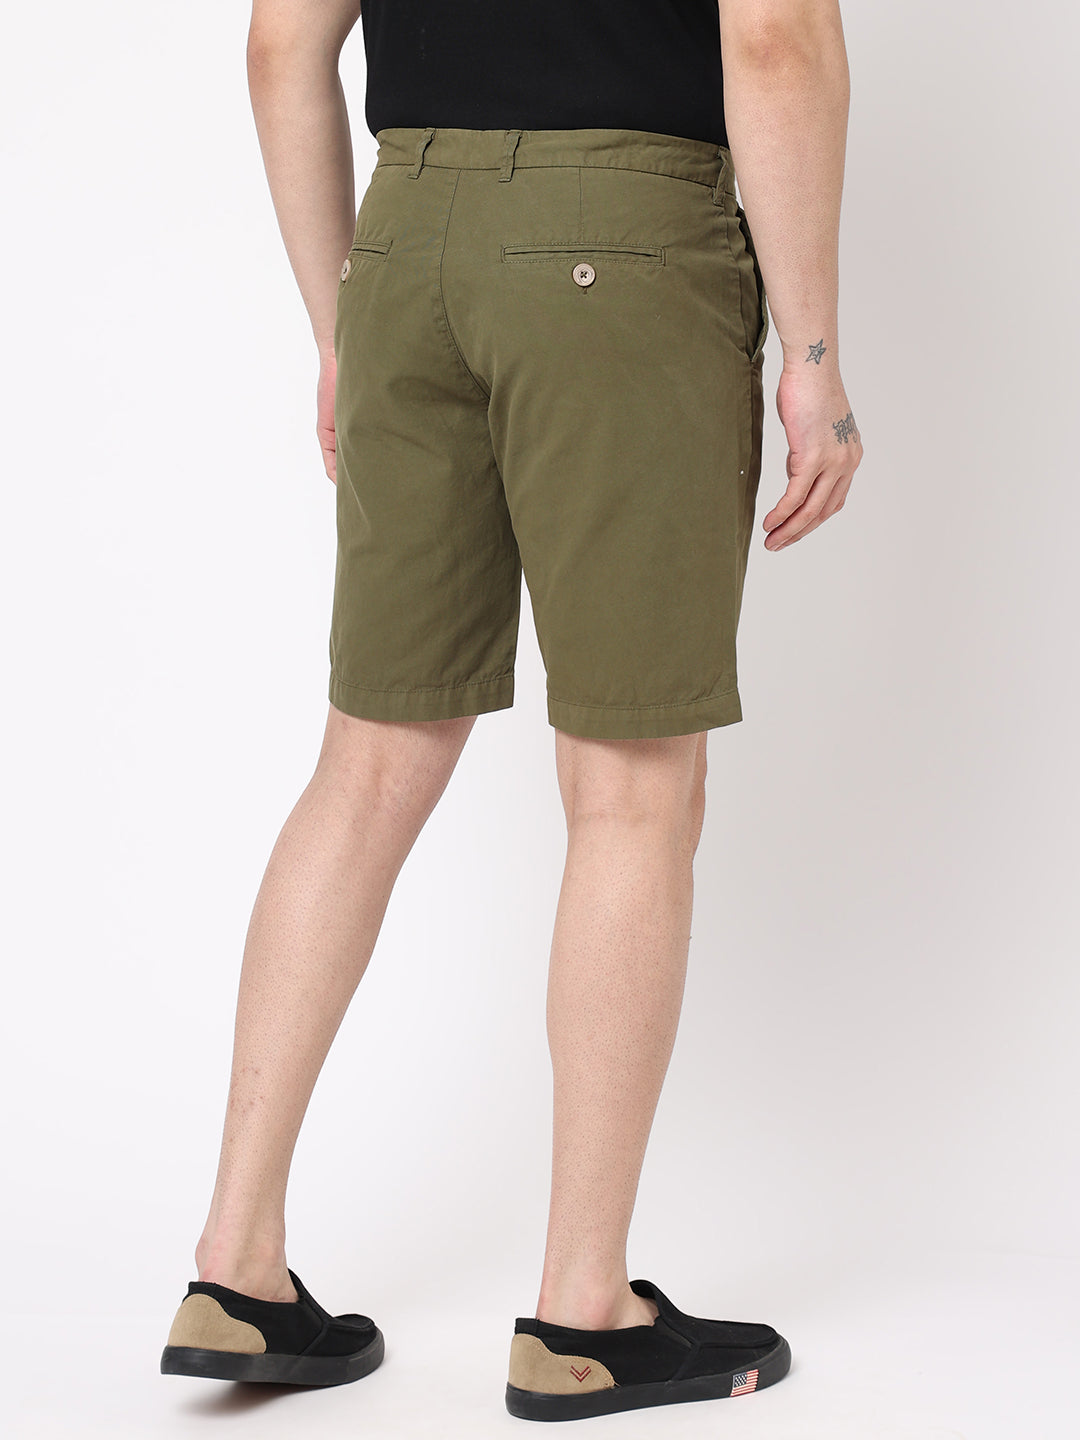 Buy Pick Any-4 Plain Mens Boxer Shorts Combo Online in India at Beyoung